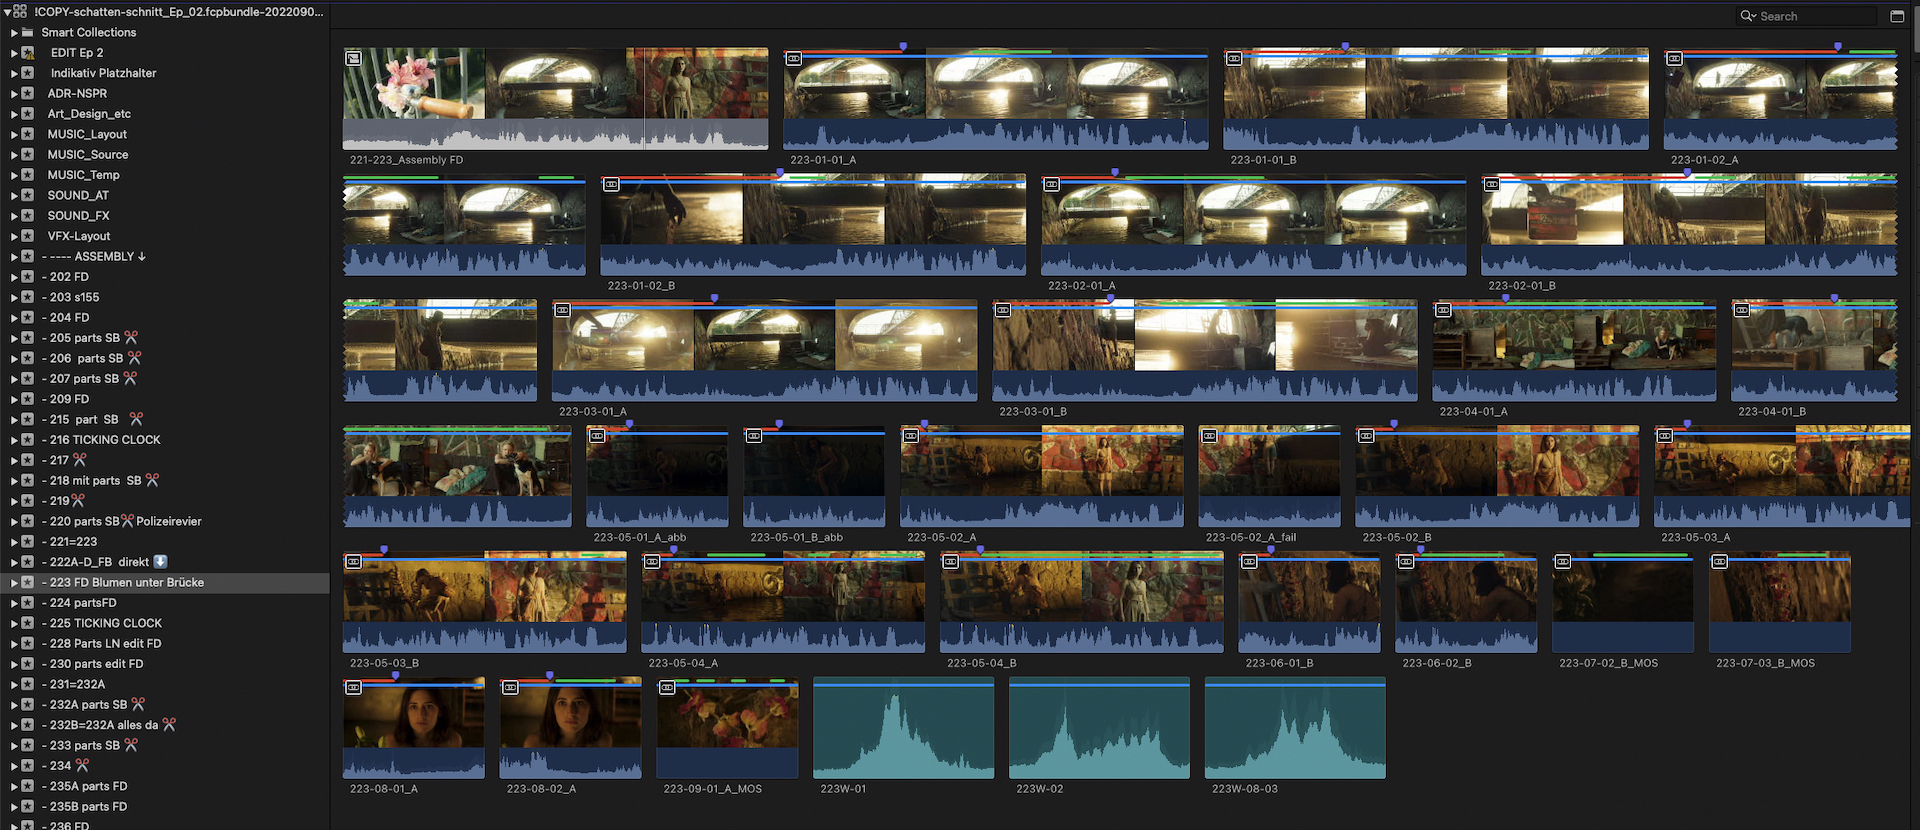 One single scene with around 30 clips (takes) in it.